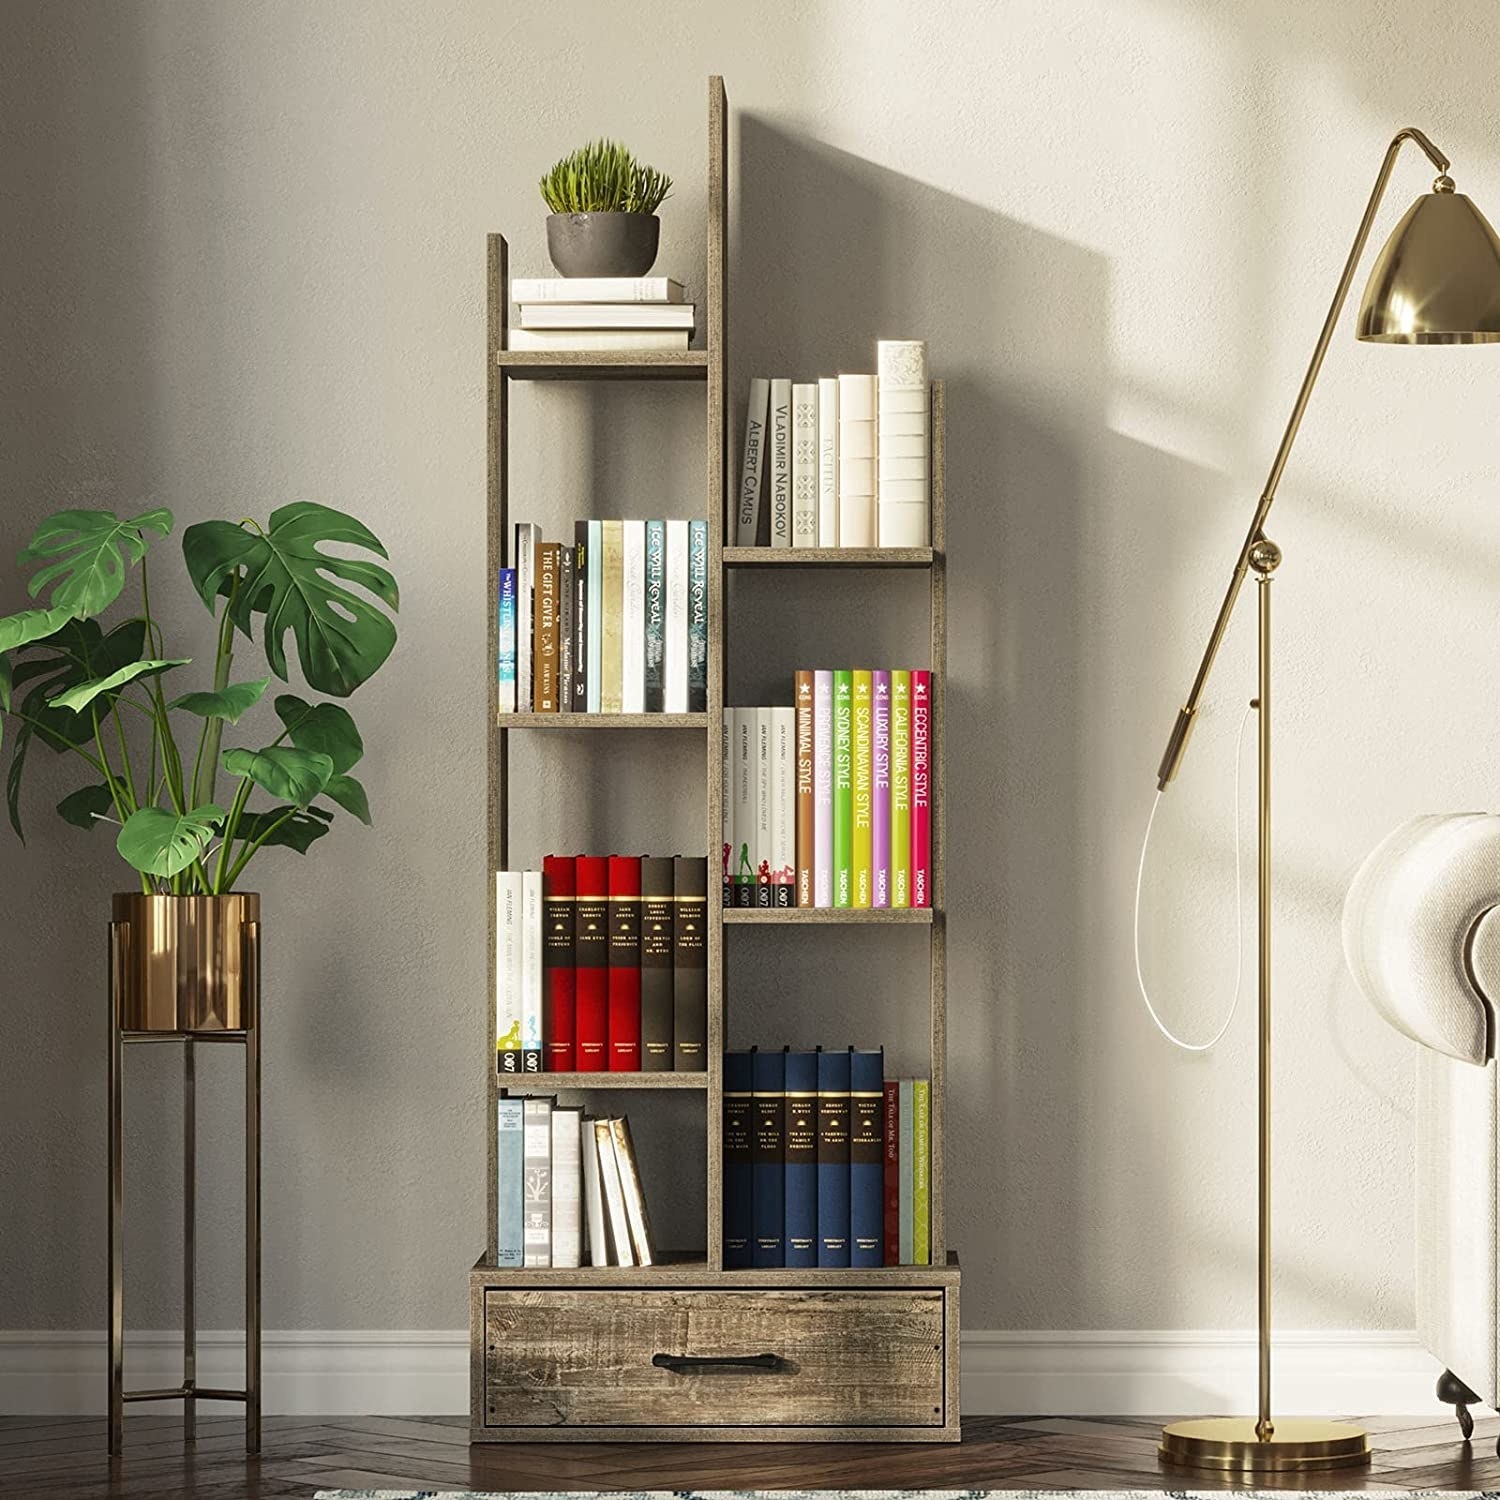 The bookshelf between a floor lamp and a potted plant